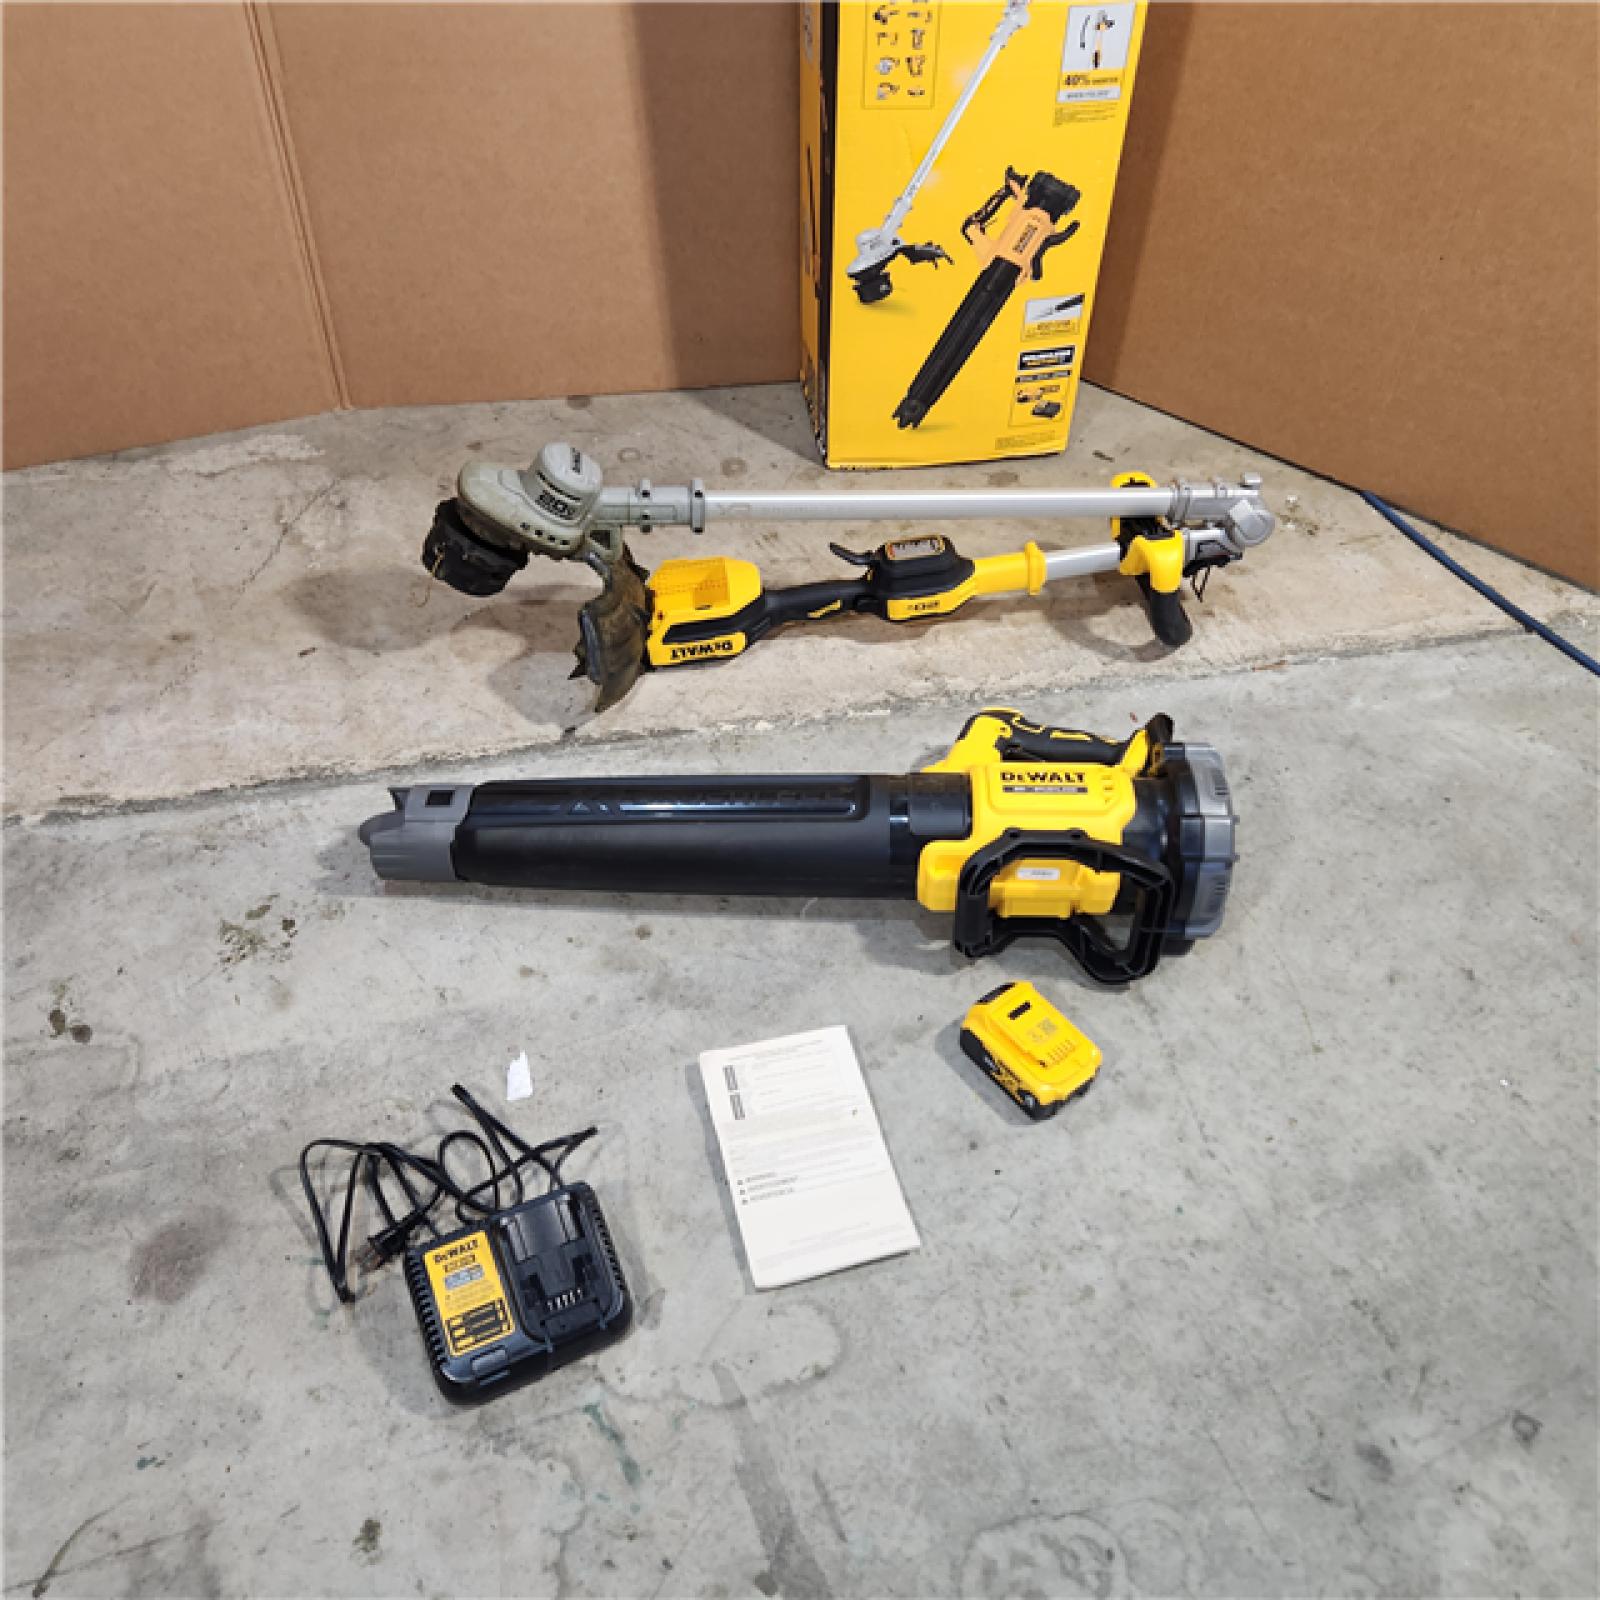 Houston location AS-IS DEWALT 20V MAX Cordless Battery Powered String Trimmer & Leaf Blower Combo Kit with (1) 4.0 Ah Battery and Charger